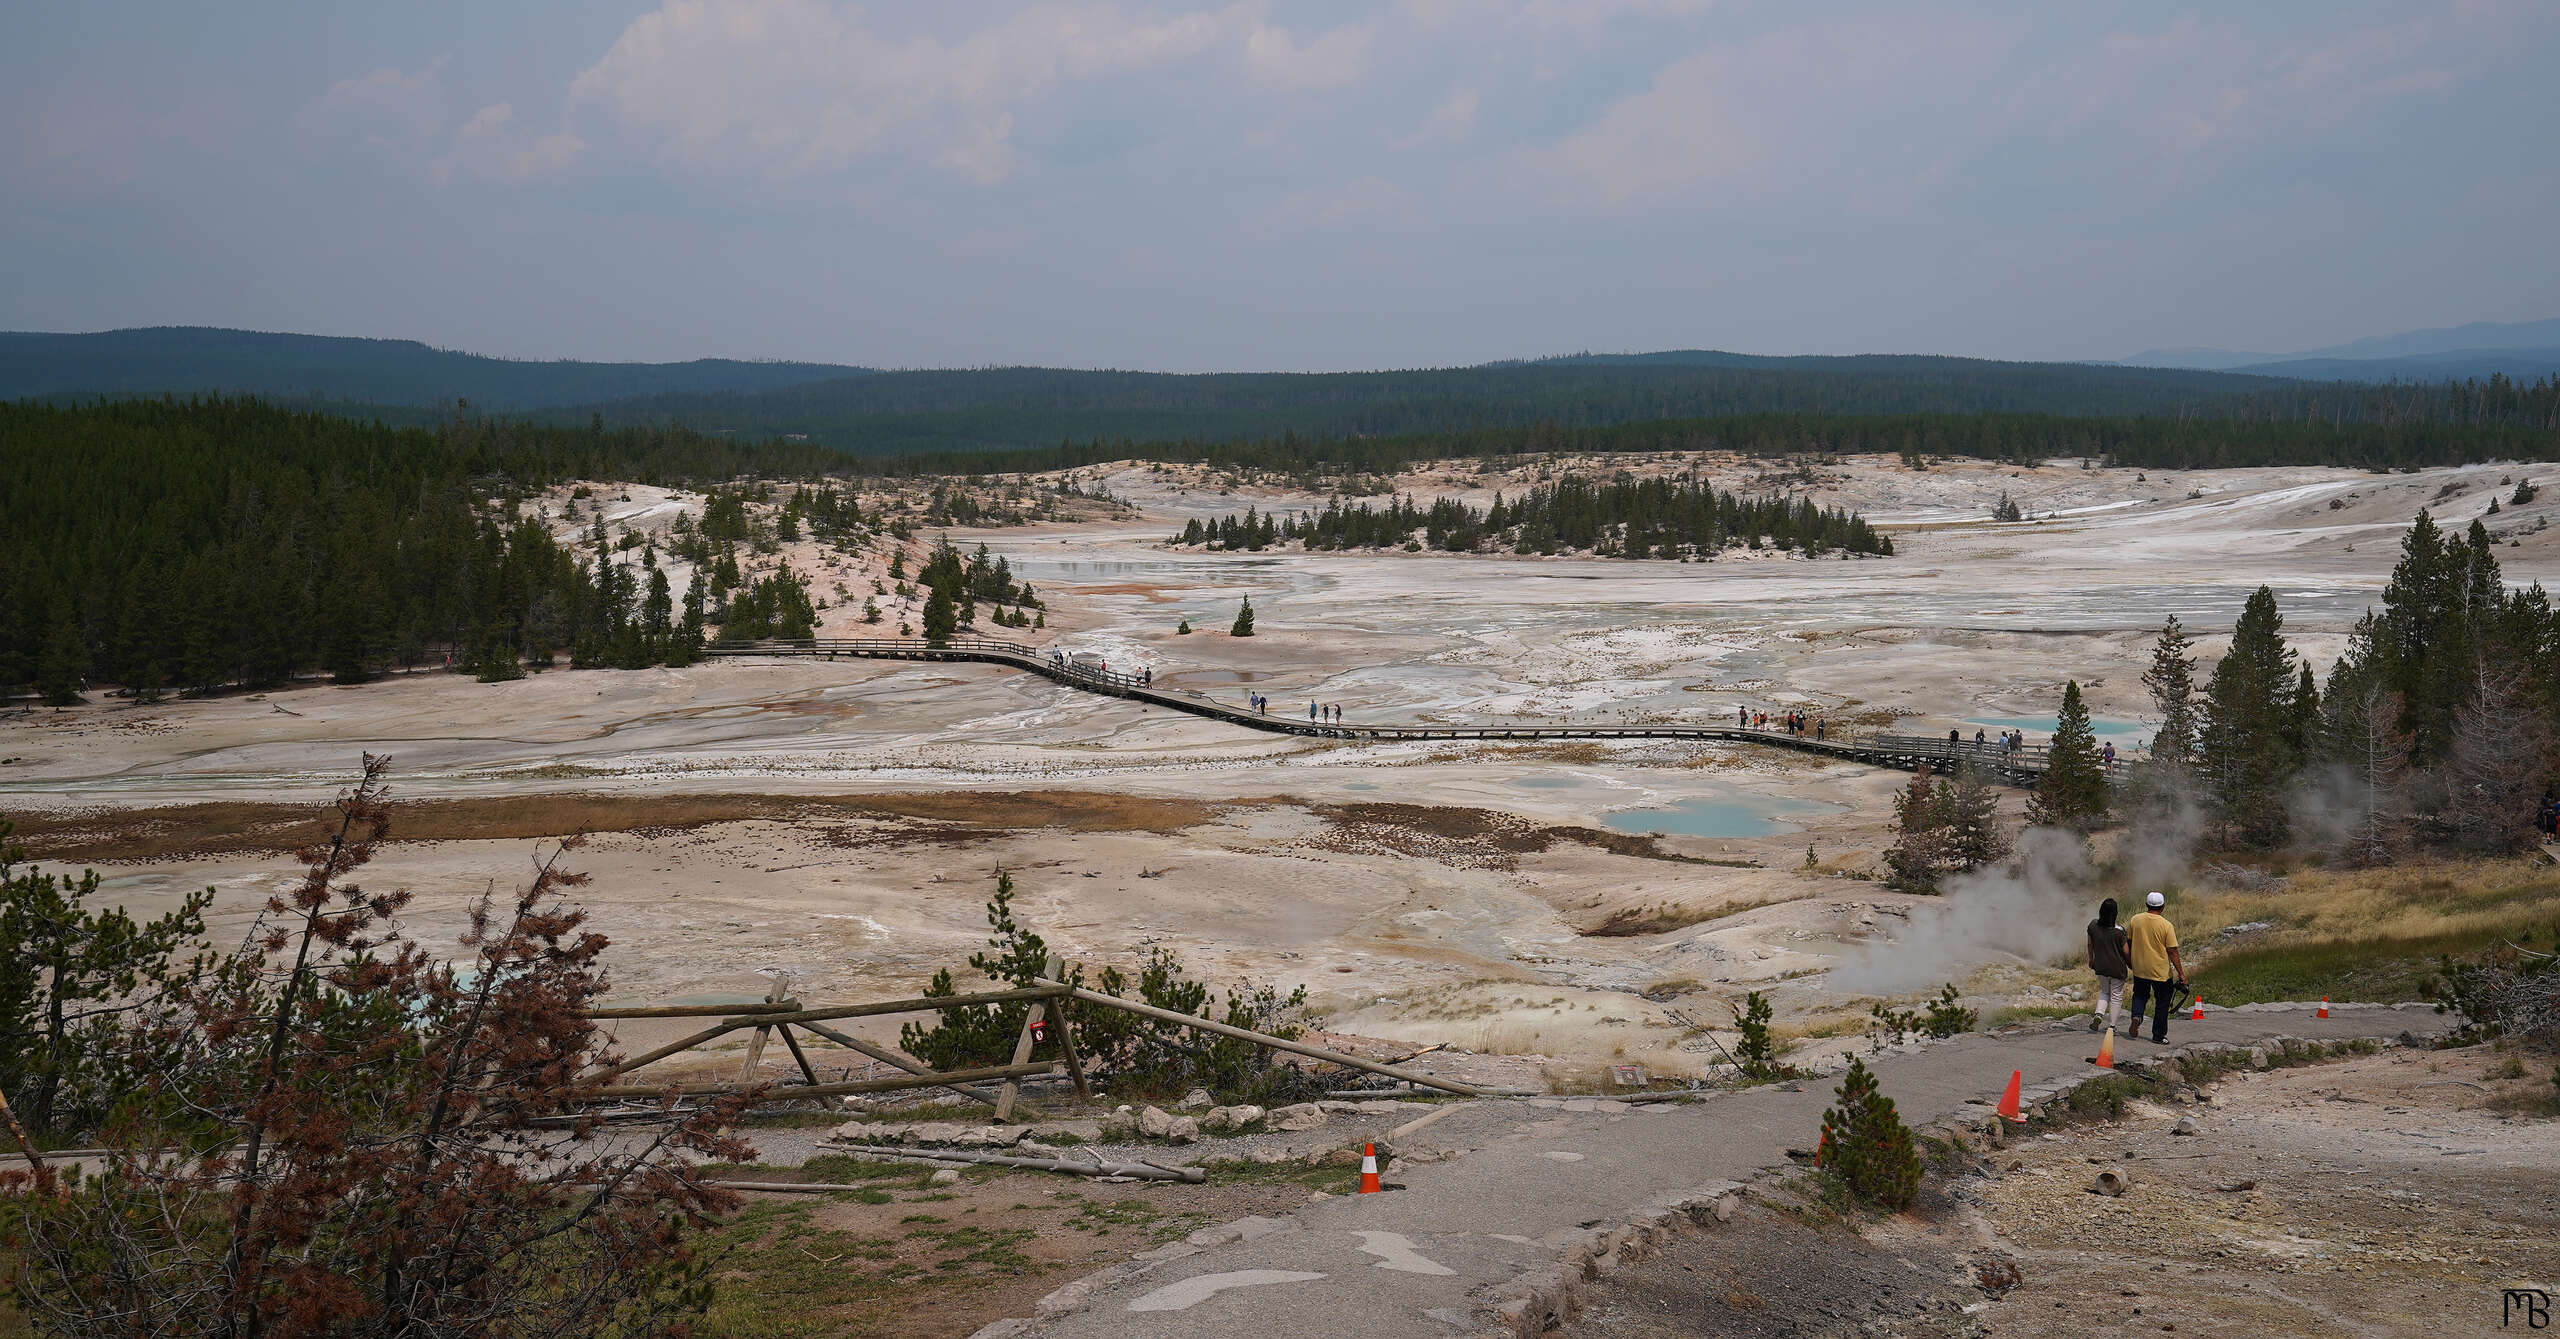 A wide shot of the Norris Geyser Basin